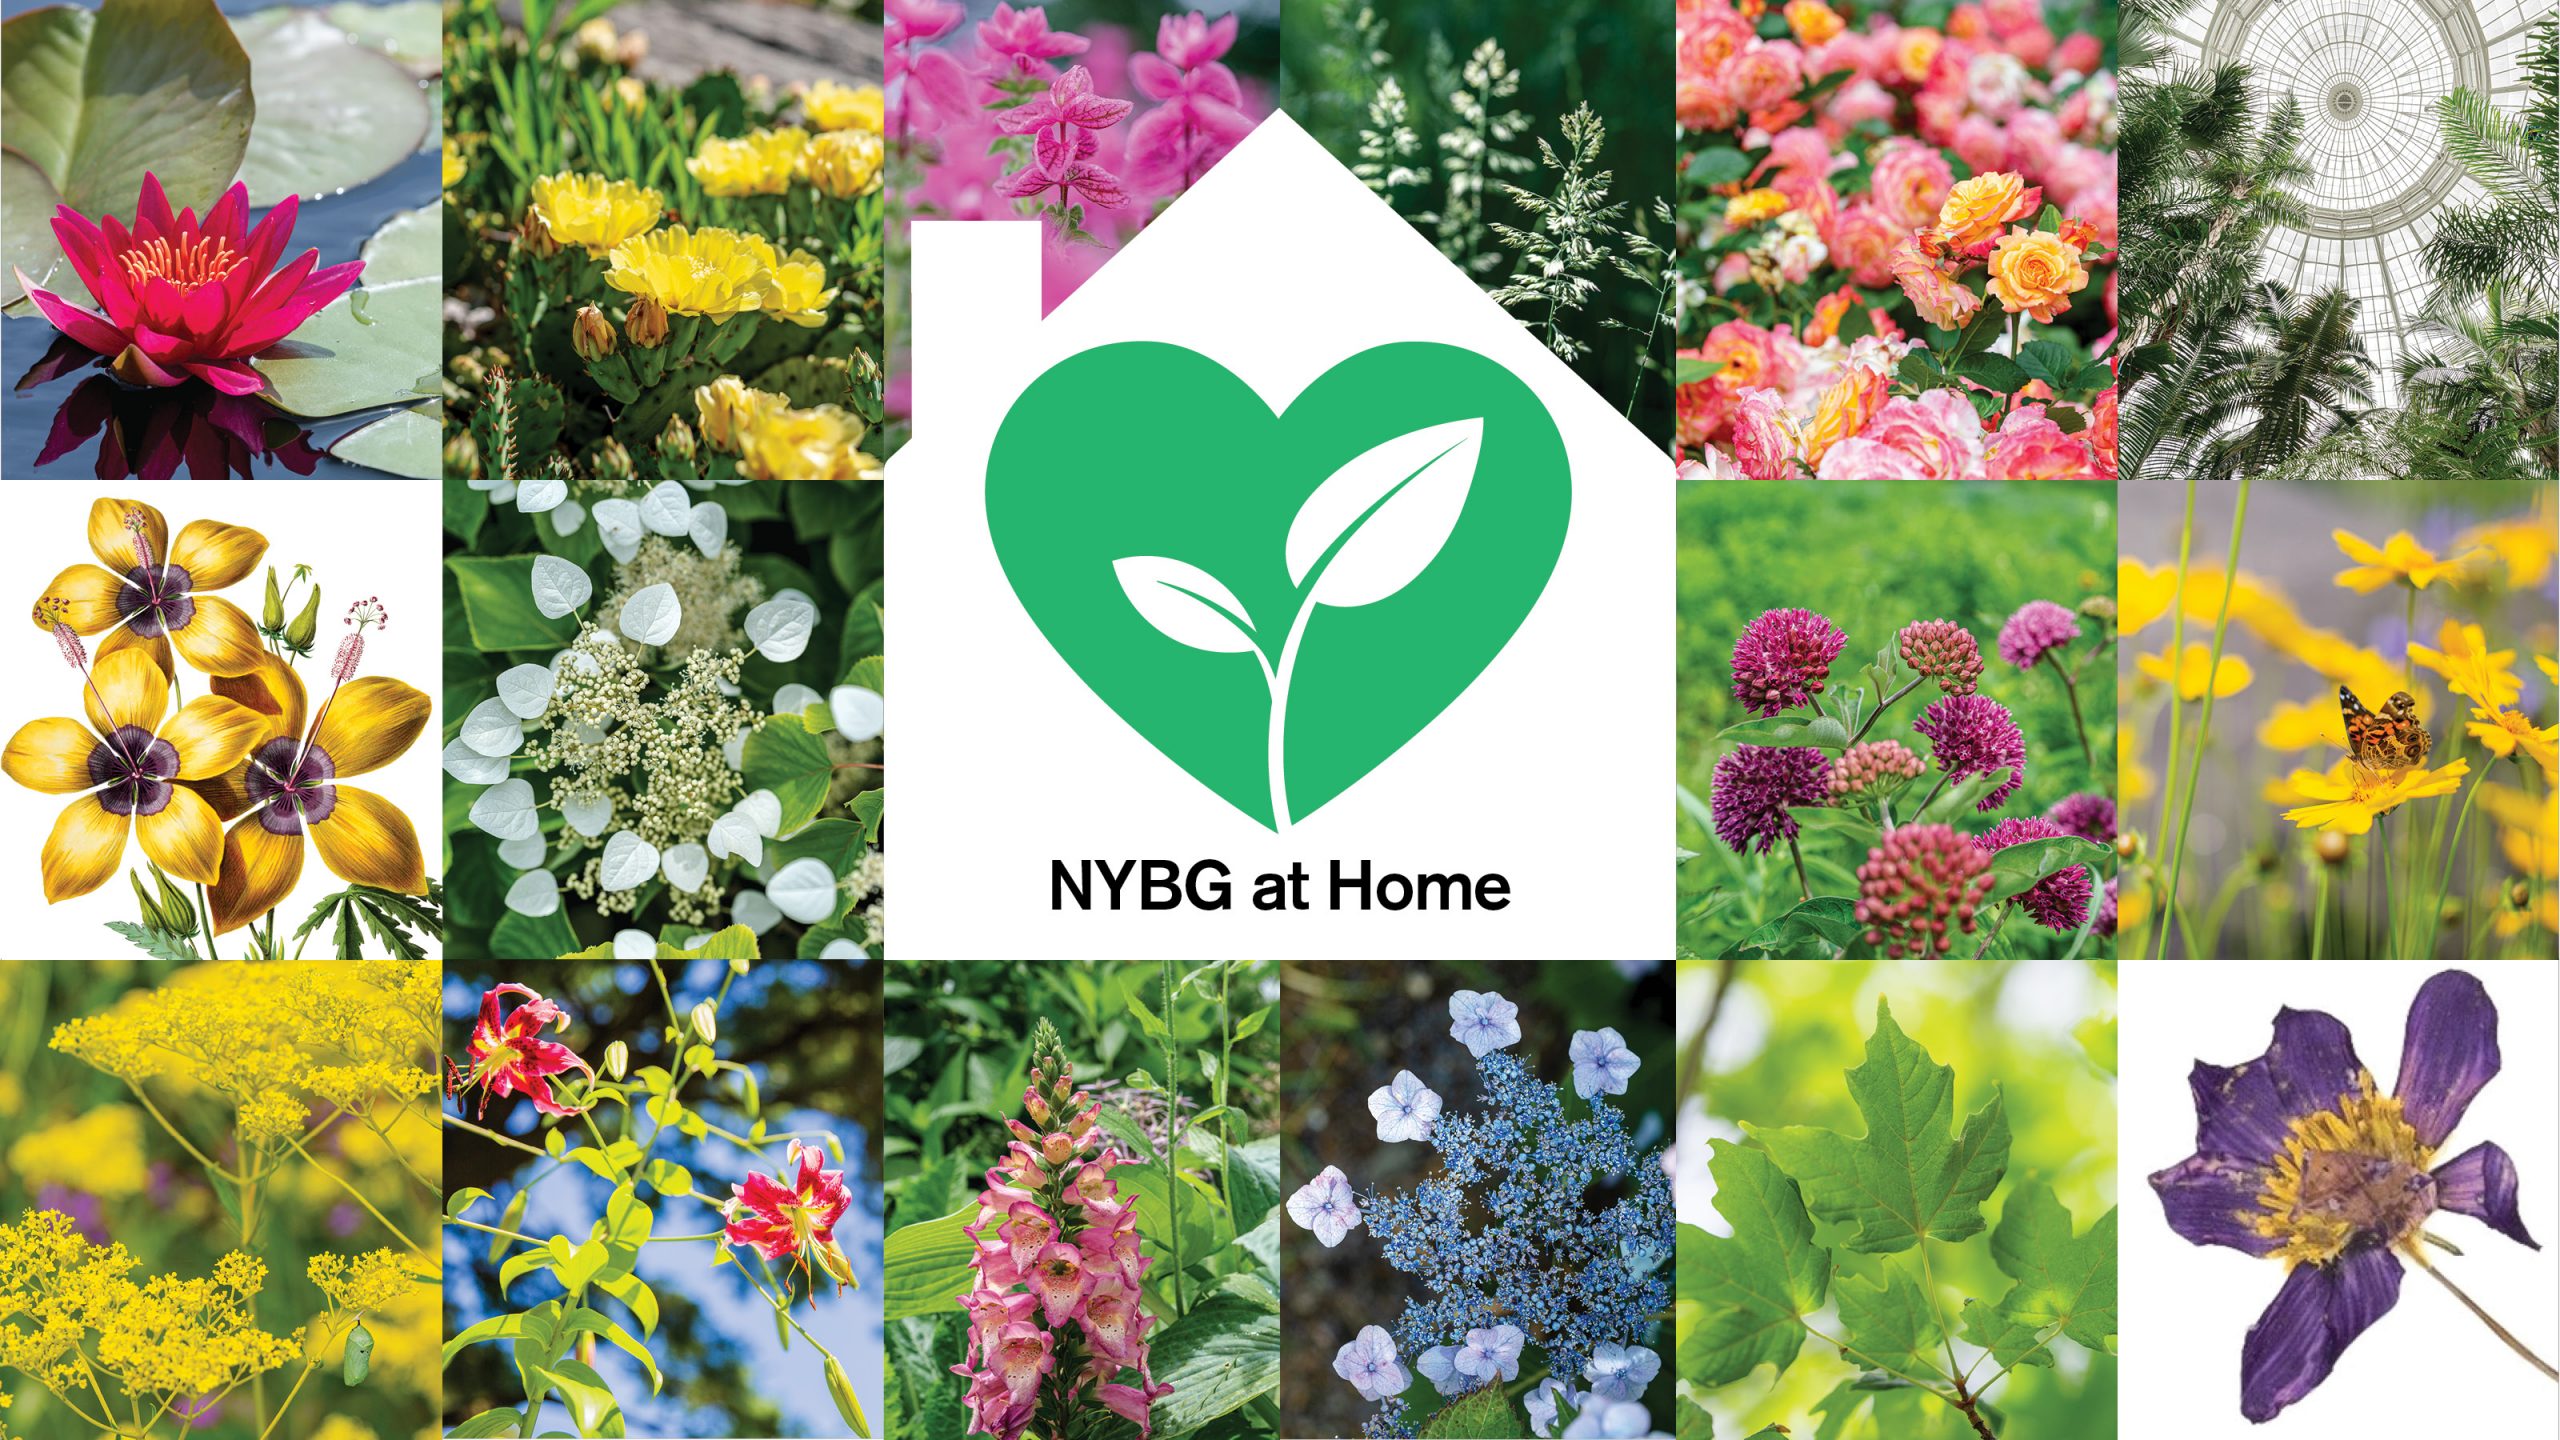 A variety of tiled images of flowers with a white illustration of a home in the center, housing a green heart with a sprout growing inside, along with the words "NYBG at Home."